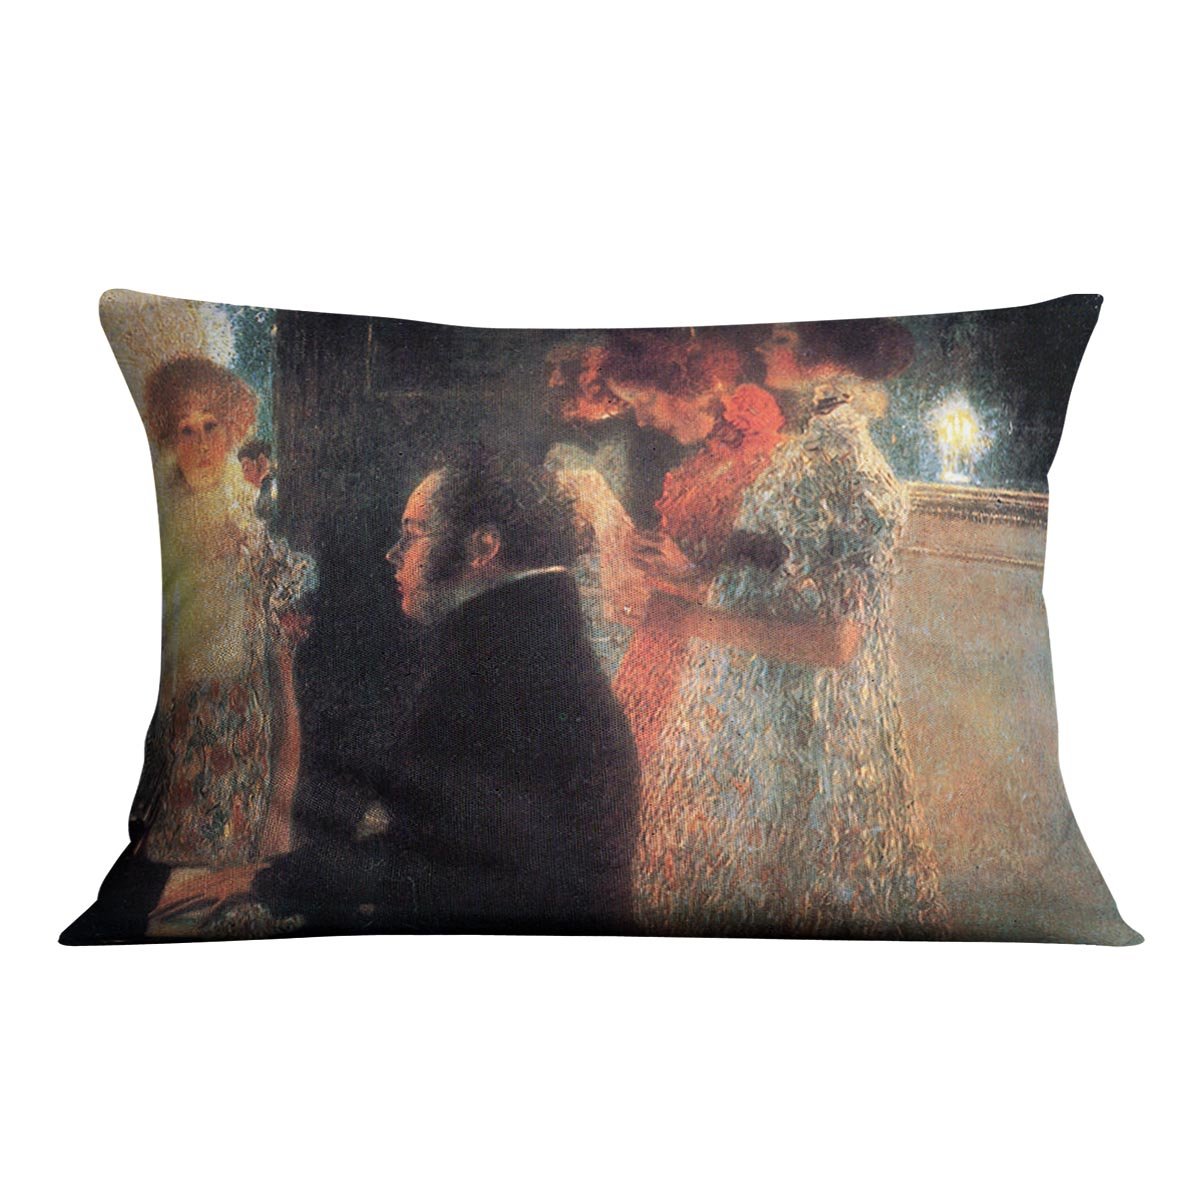 Schubert at the piano by Klimt Throw Pillow